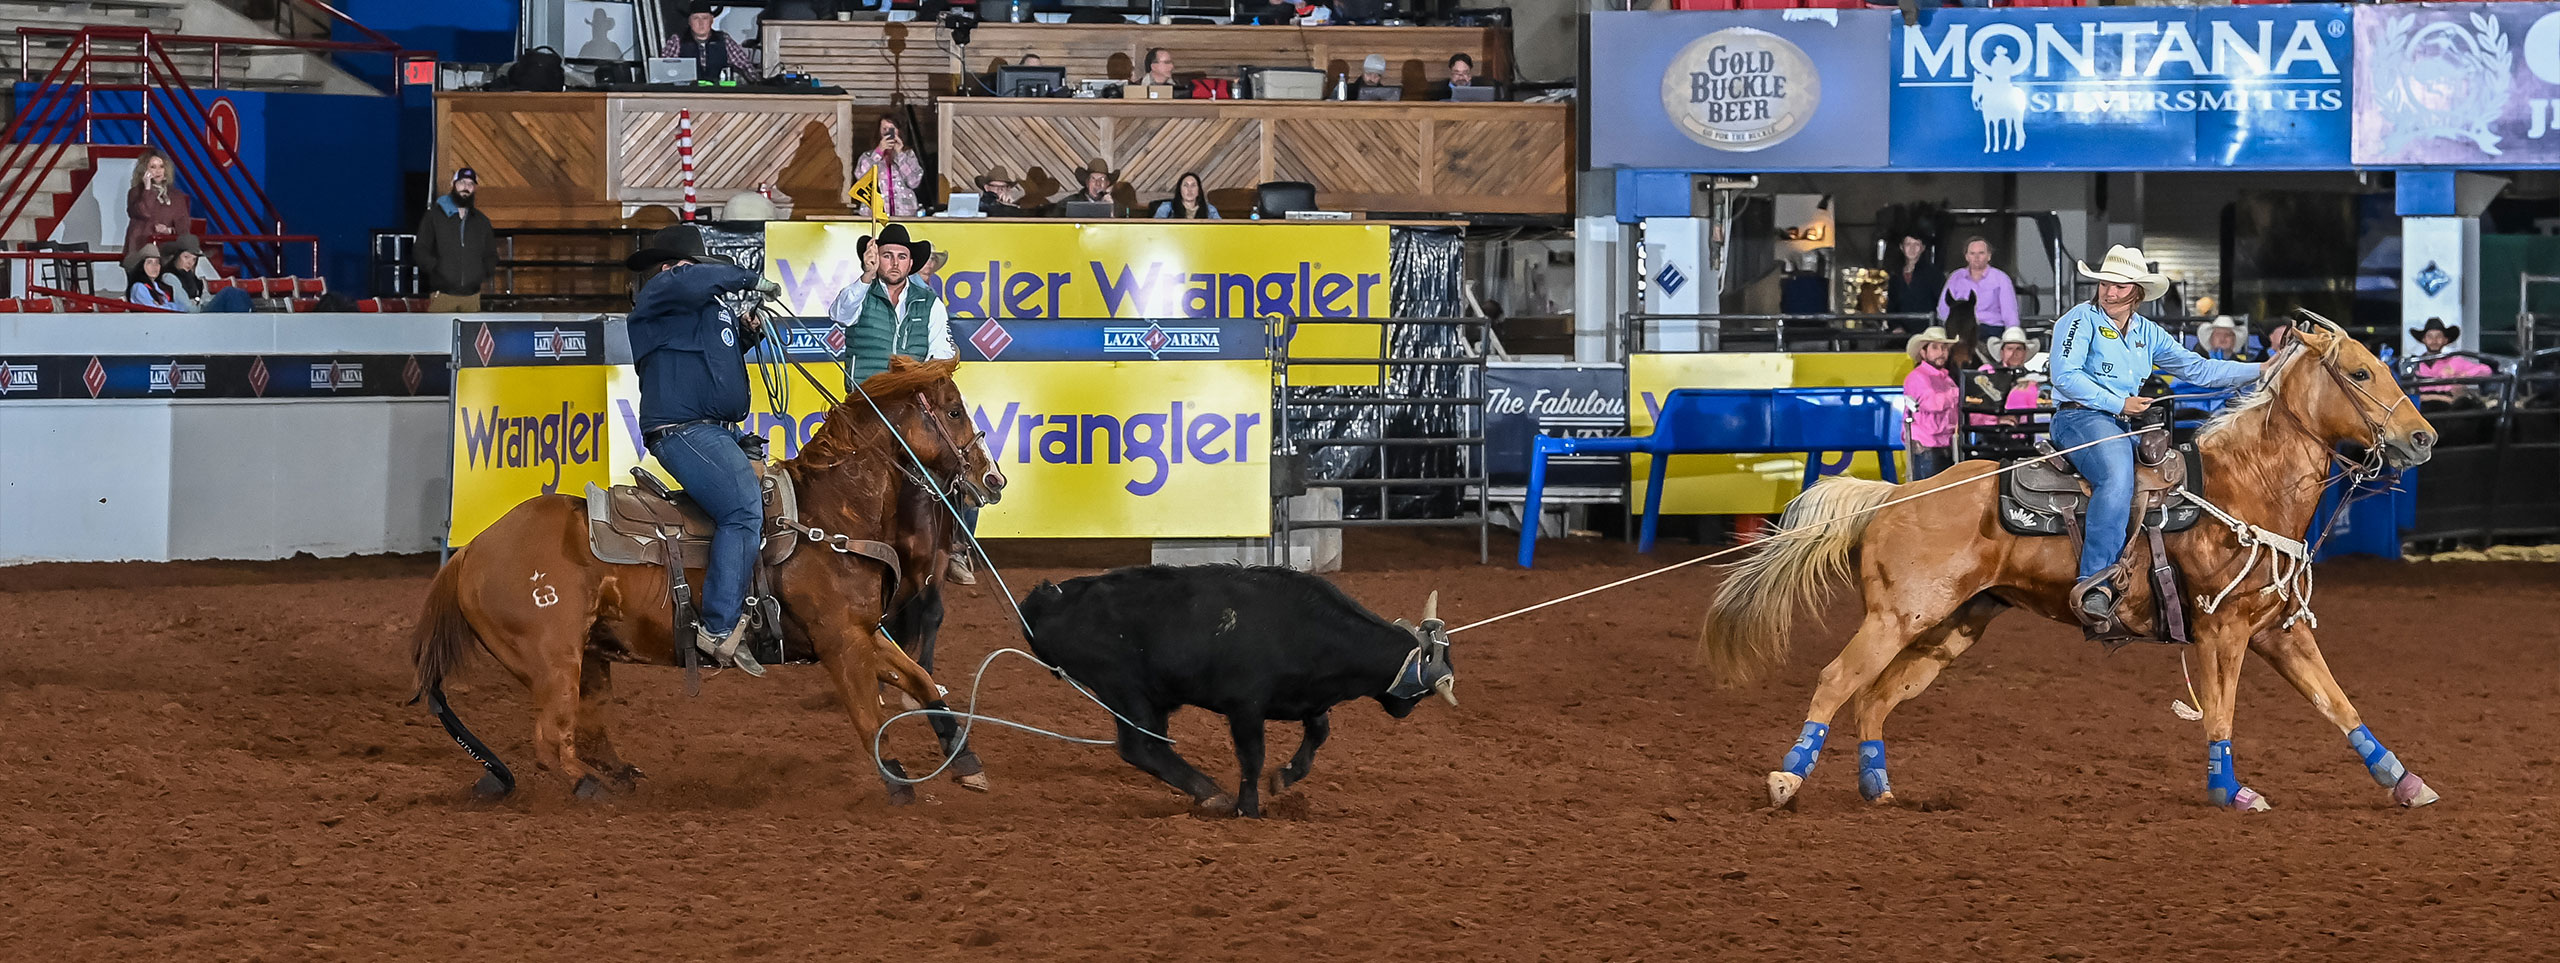 Kelton and DeSalvo Take Home the Charlie 1 Horse All Girl Team Roping Title